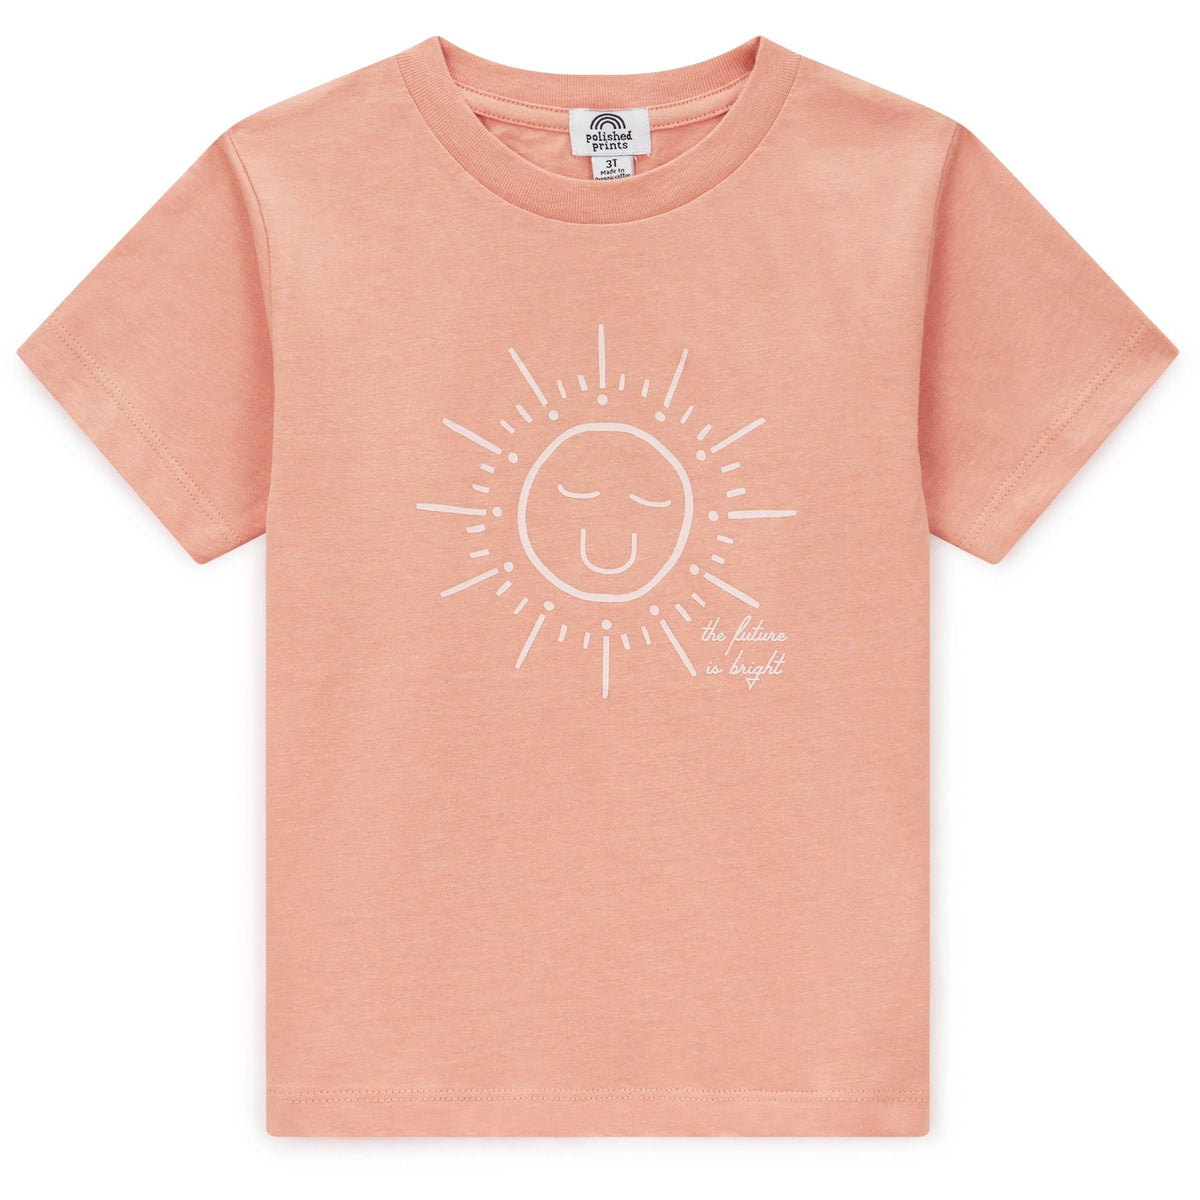 Polished Prints • Girls Future is Bright T-Shirt - All Things Dylan